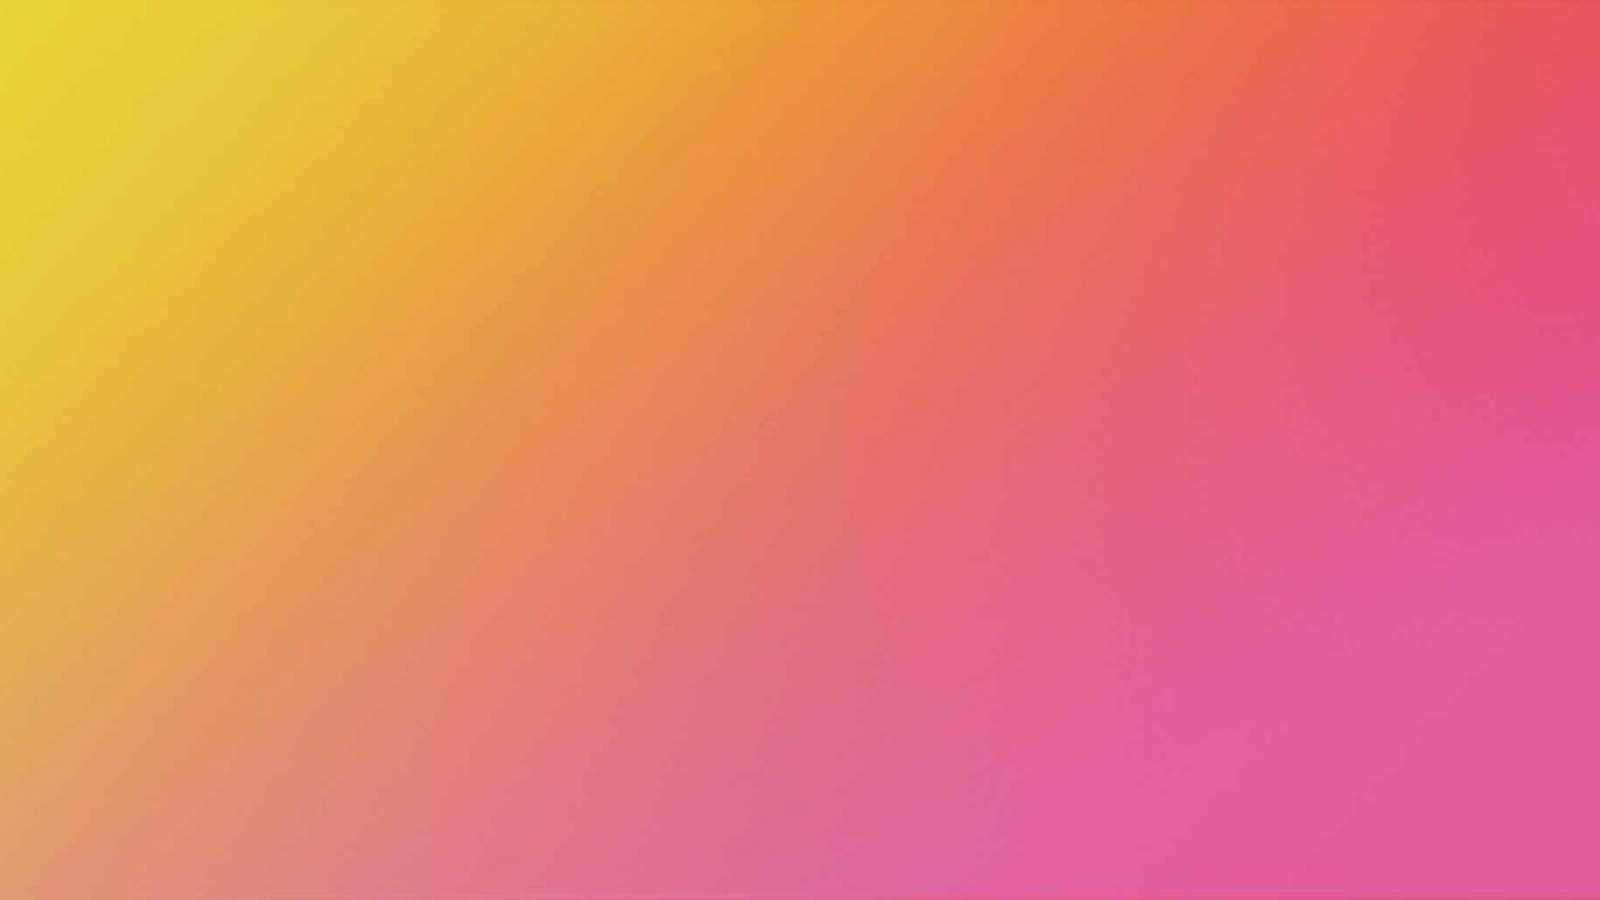 Pink and orange background 2 Background Check All